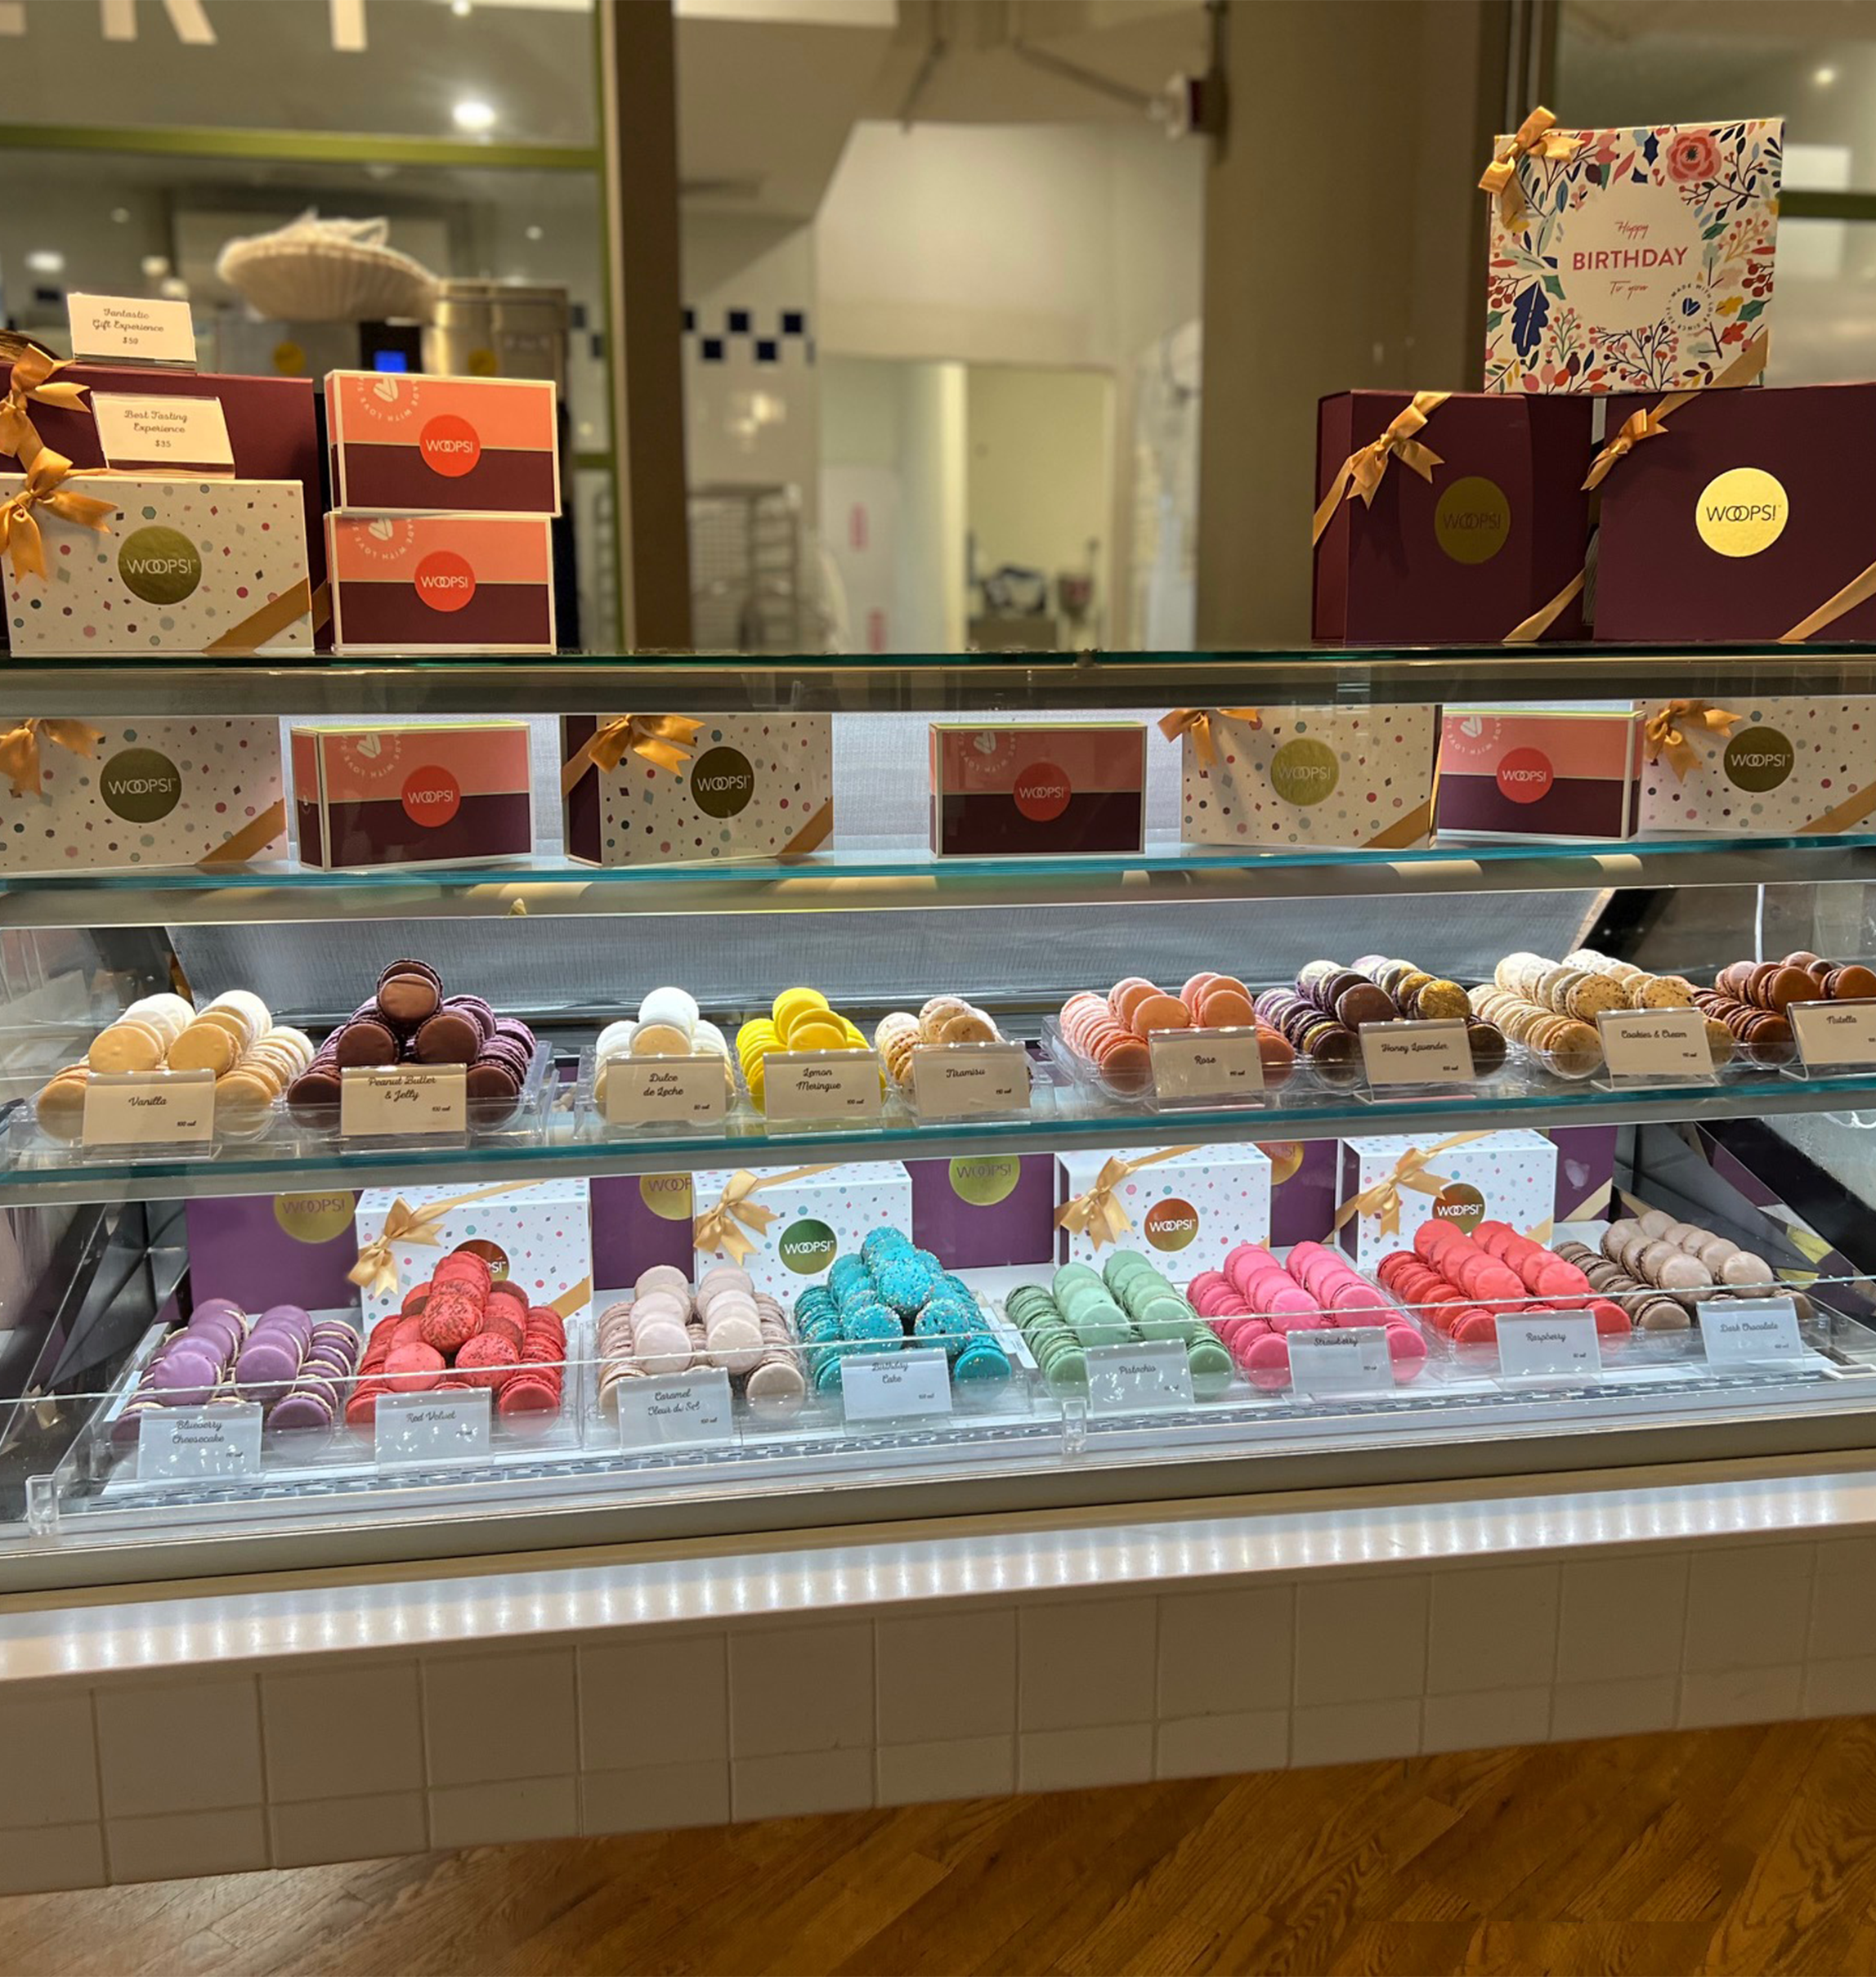 Woops! counter filled with colorful French macarons and gift boxes with ribbons